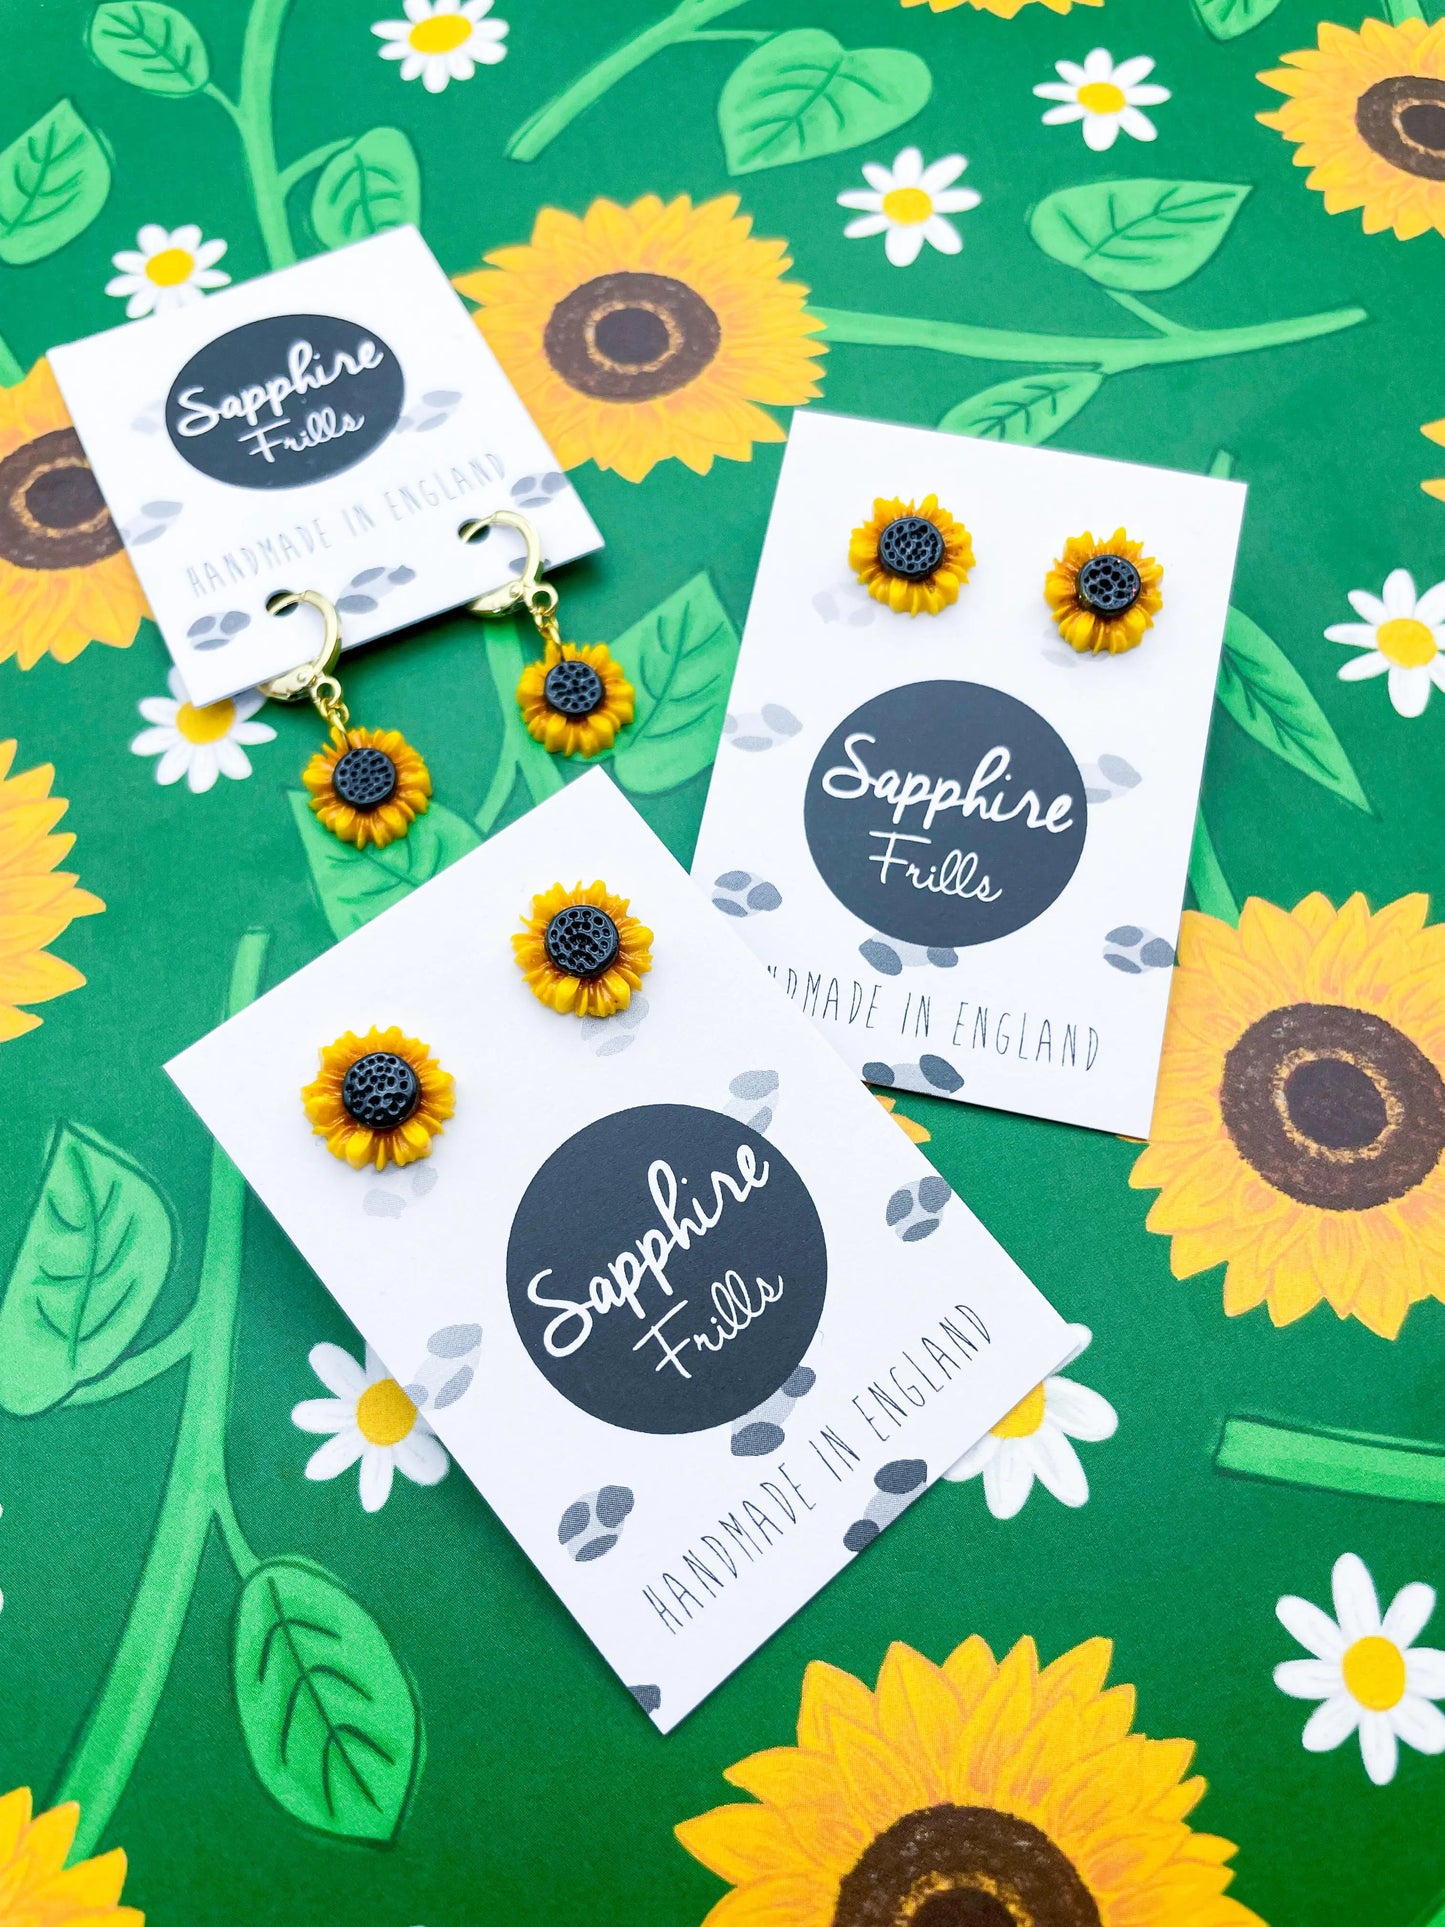 Mini Yellow and Bronze Sunflower Stud Earrings from Sapphire Frills